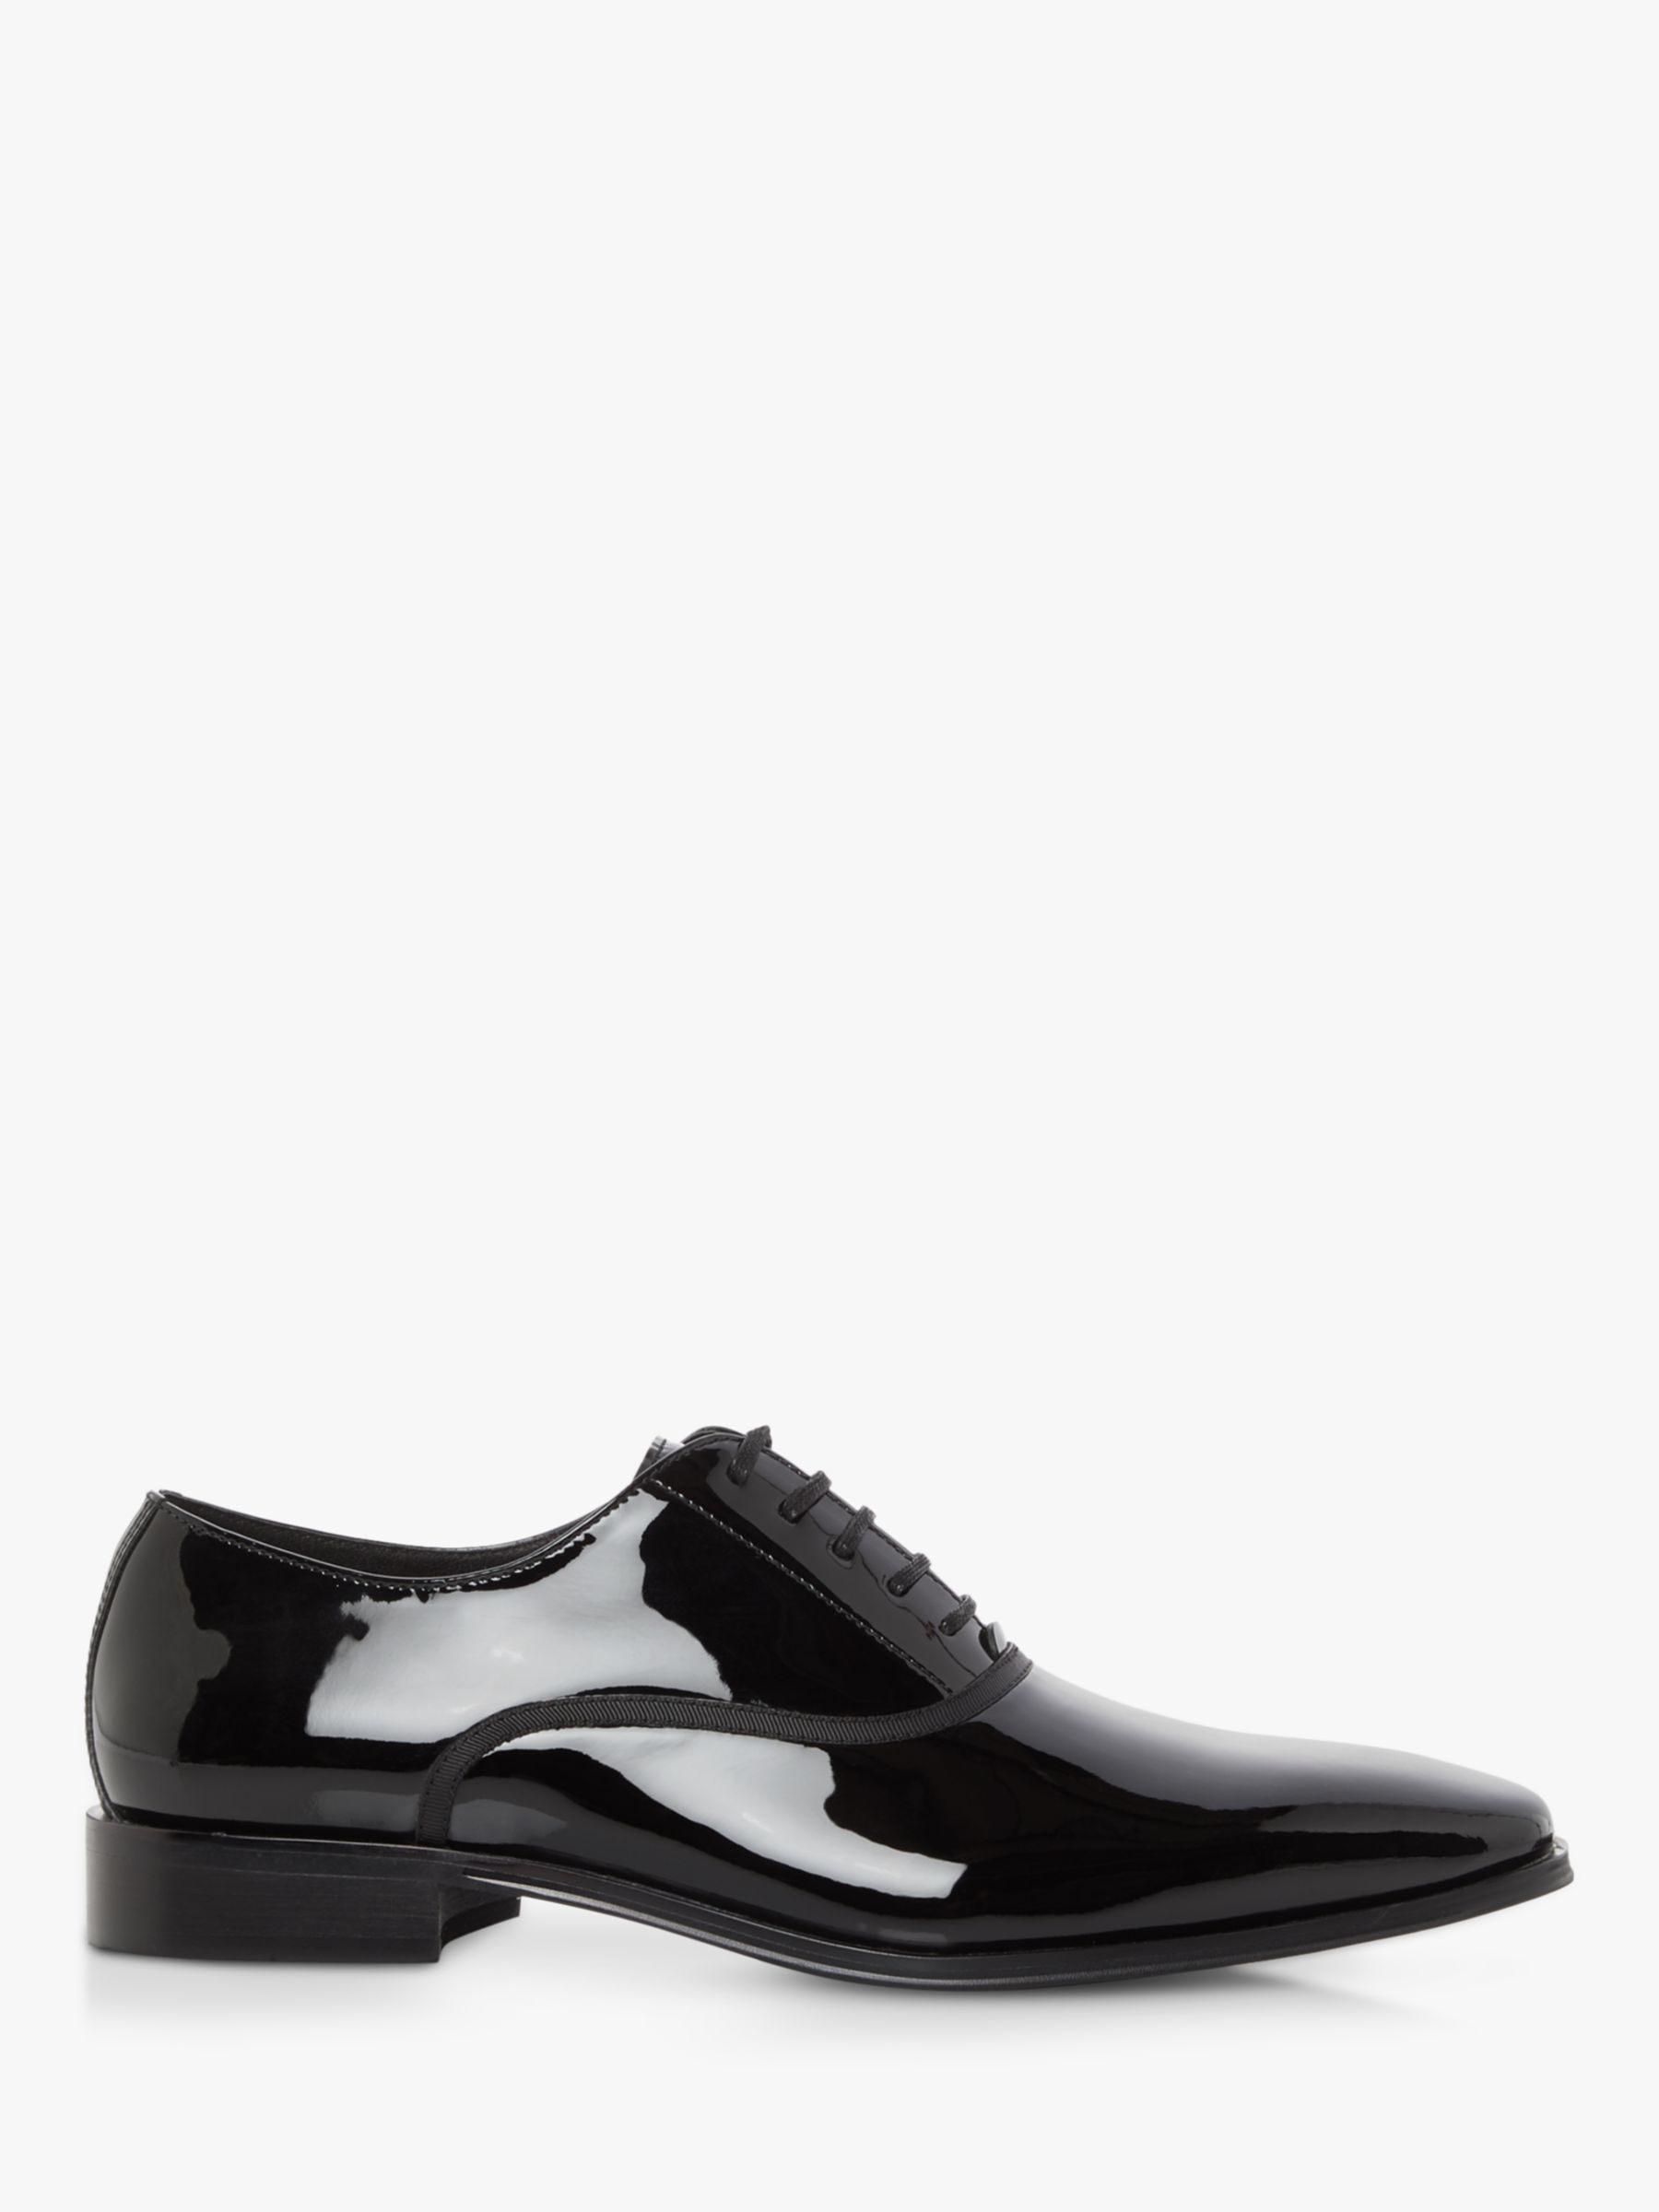 Dune Swan Patent Leather Oxford Shoes, Black, 7